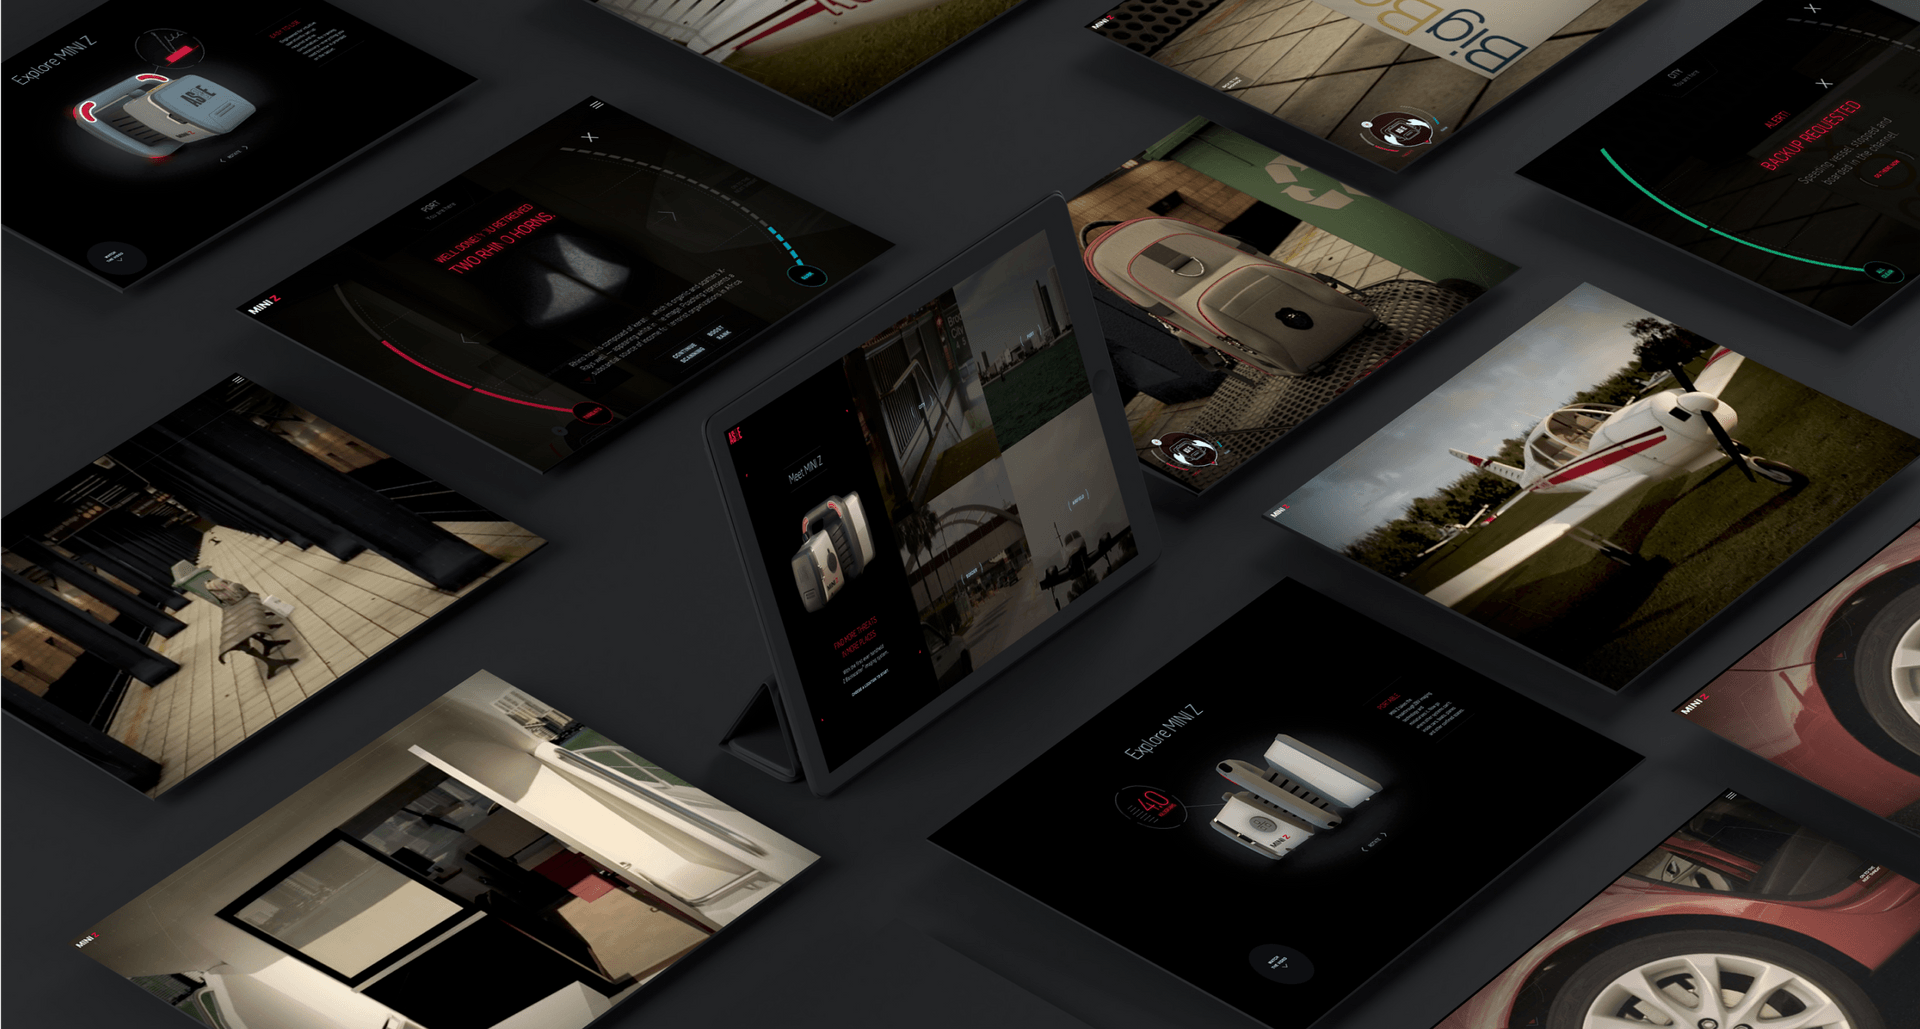 An array of screenshots displaying aspects of the "Explore Mini Z" website, including 3D product rendering and scenes from the gamified threat scanning experience